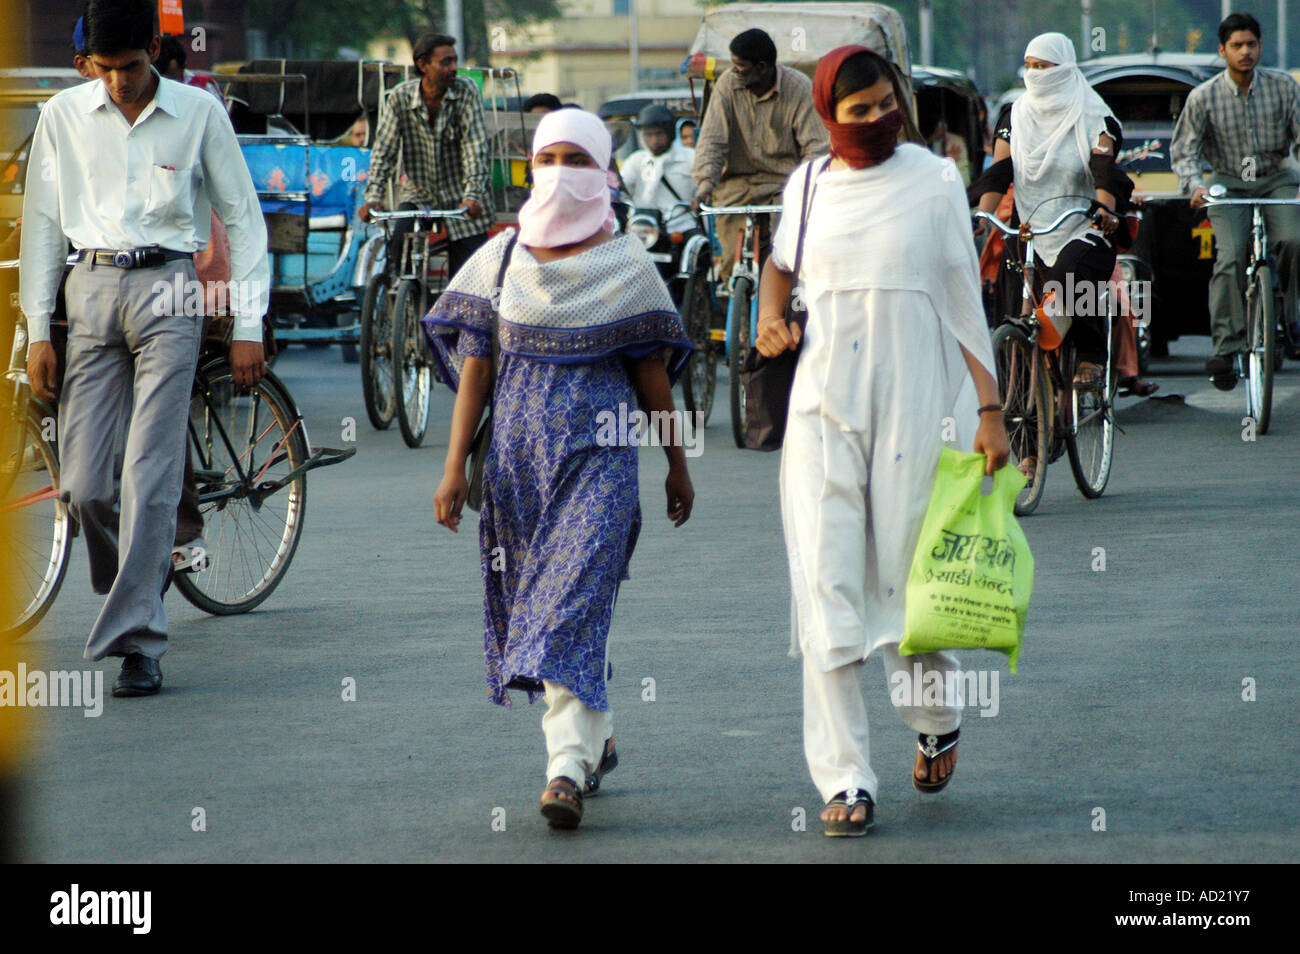 Two women cover their faces with scarf to avoid heat during the summer season, Nagpur city, Maharashtra, India Stock Photo